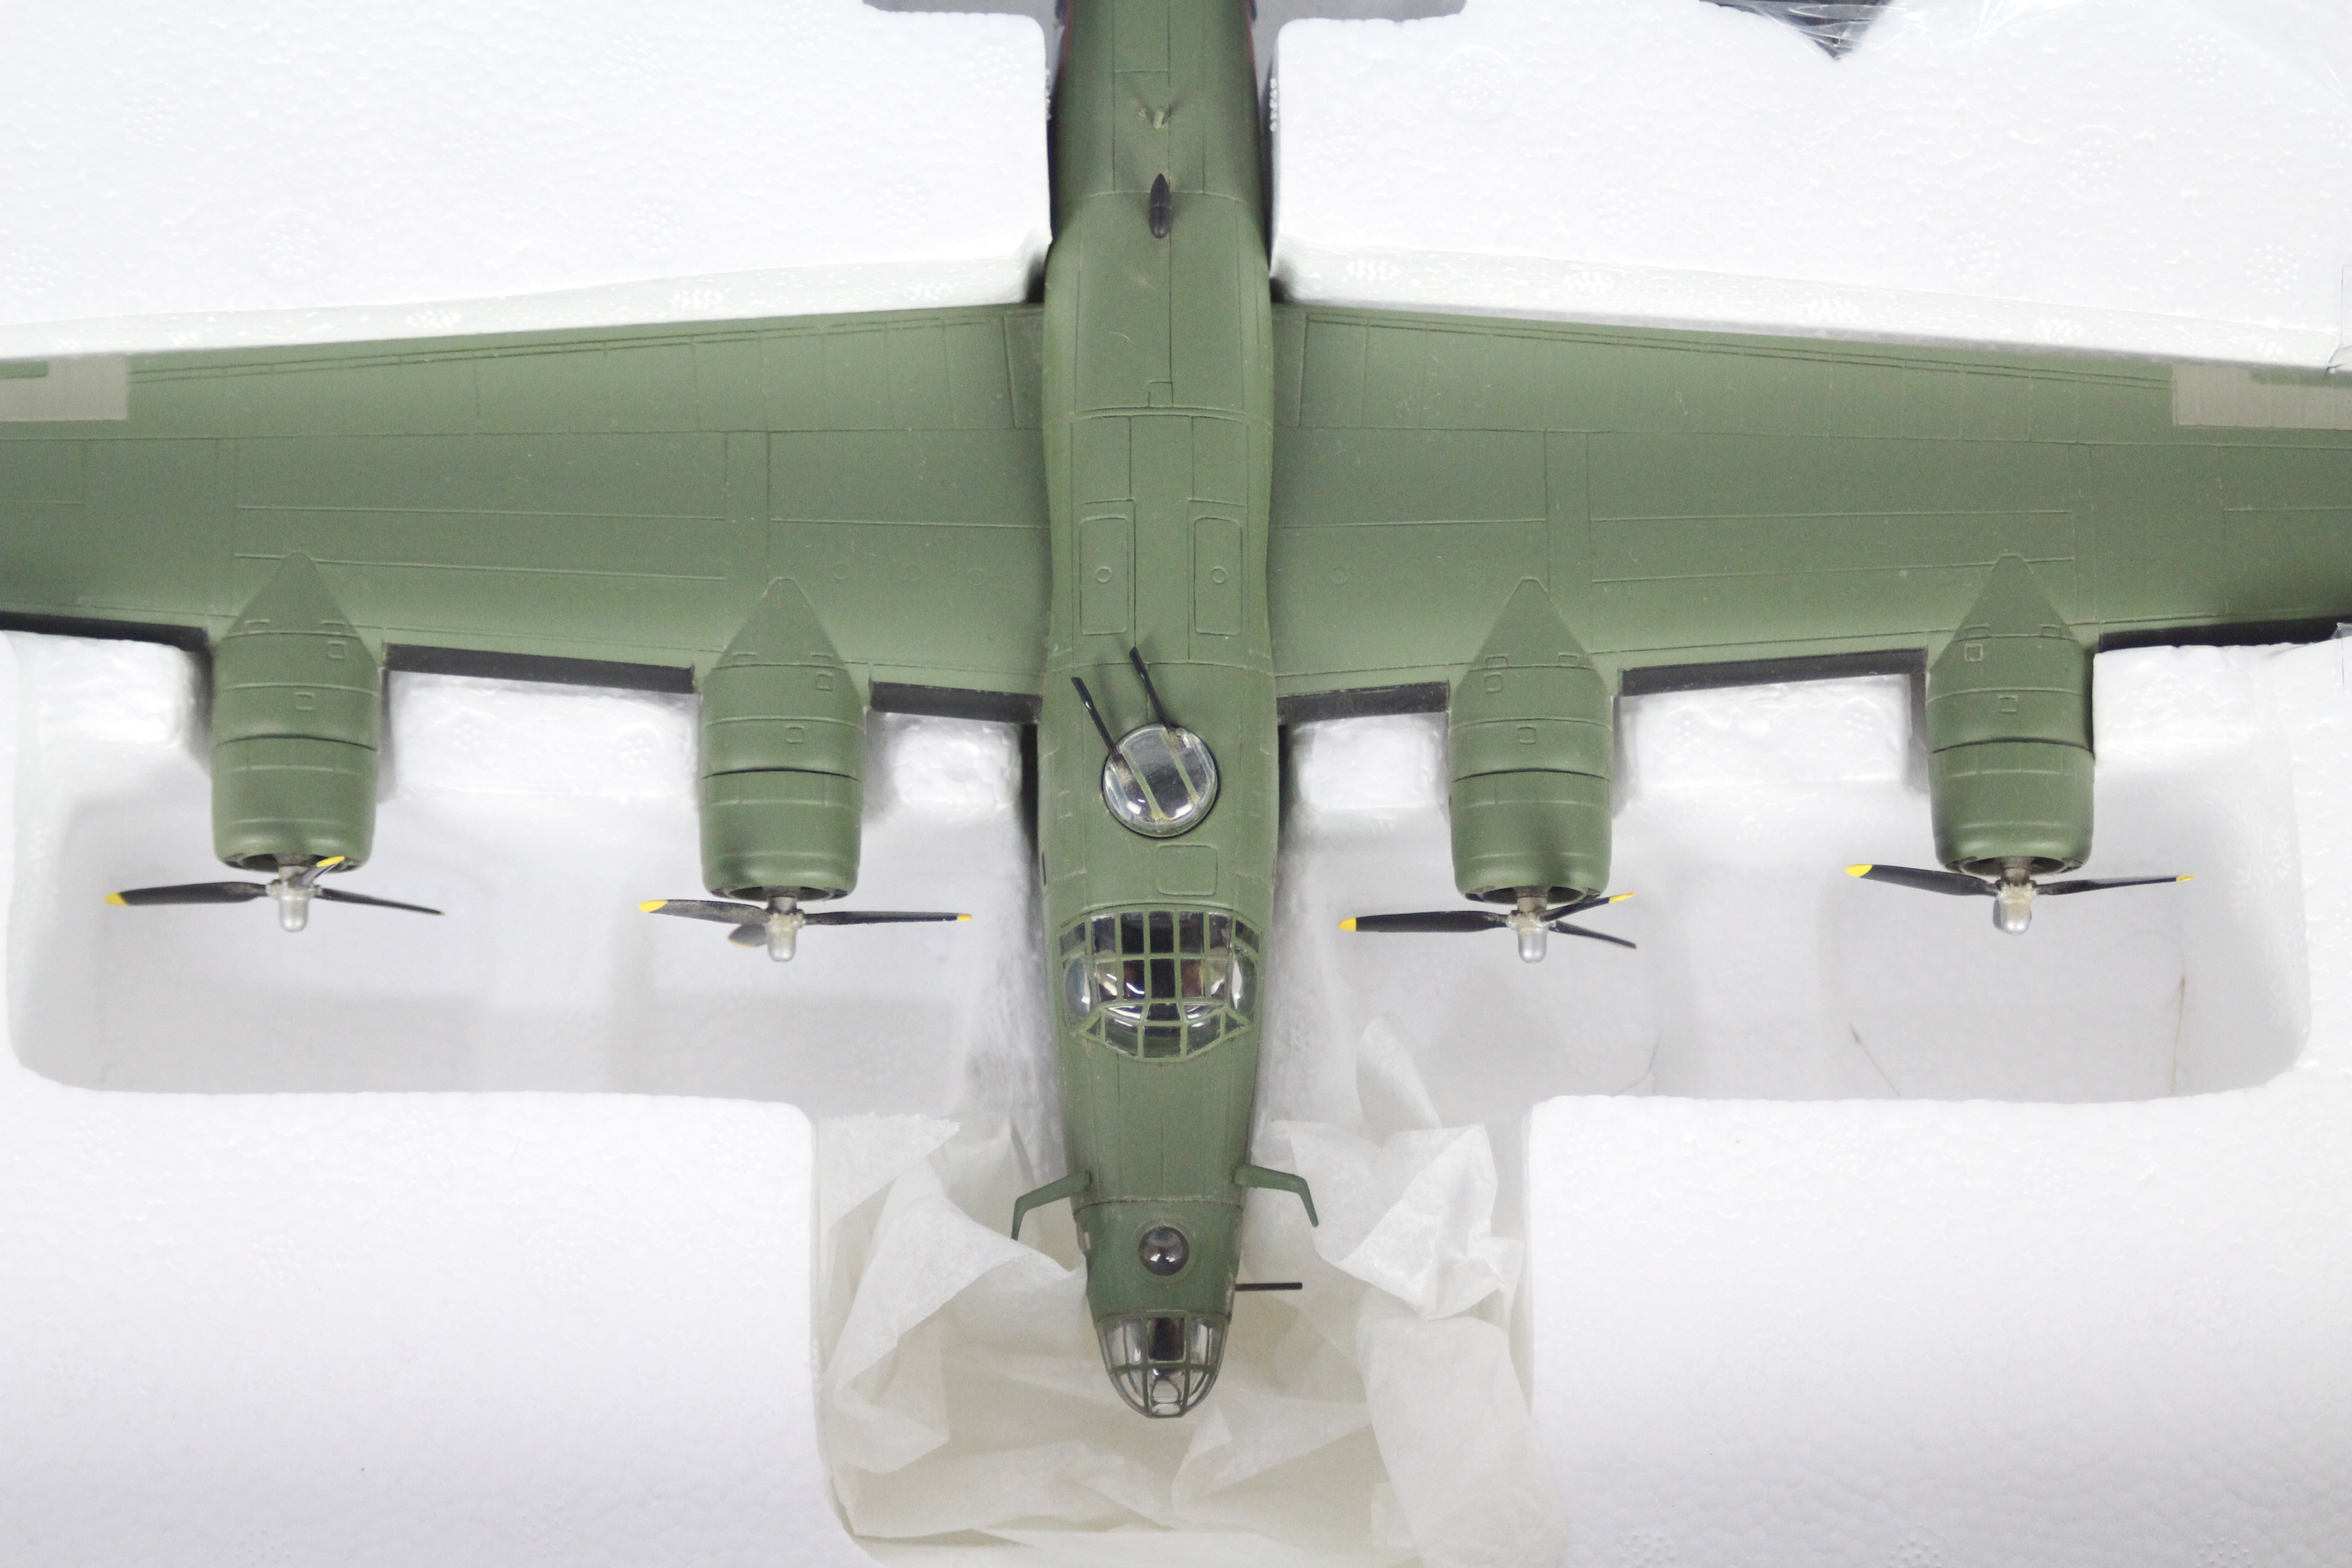 Corgi Aviation Archive - A boxed Limited Edition 1:72 scale AA34002 Consolidated B-24D Liberator, - Image 3 of 6